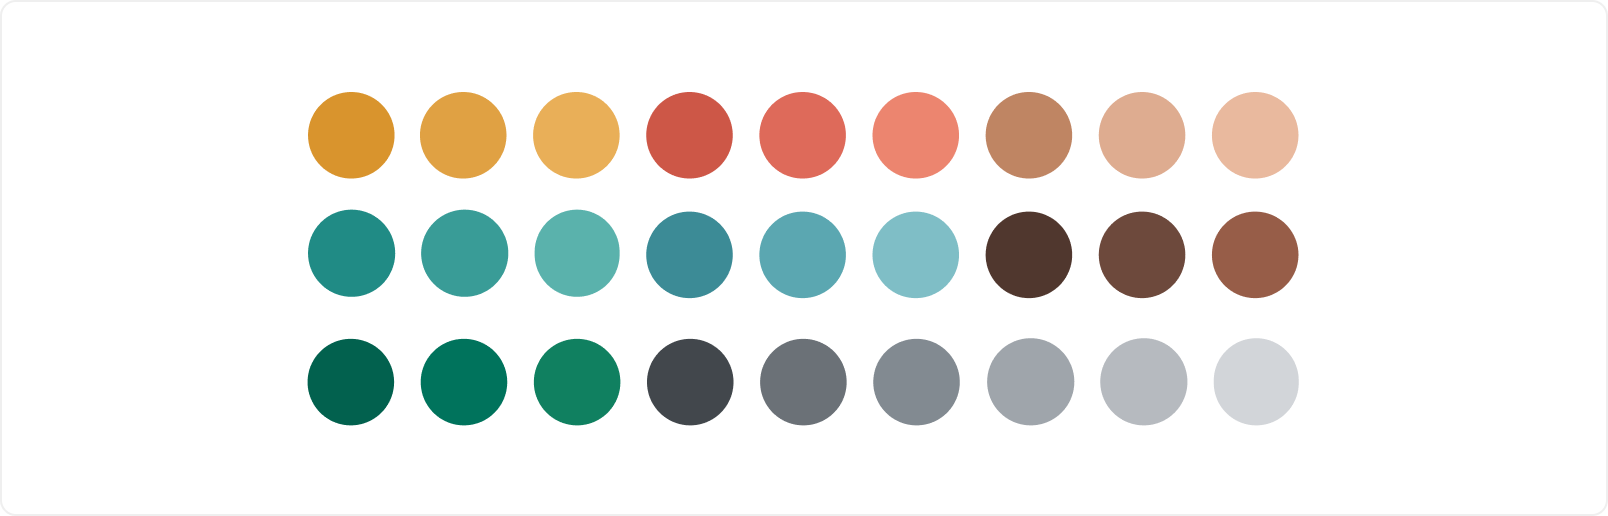 A color palette and illustrations using the color palette